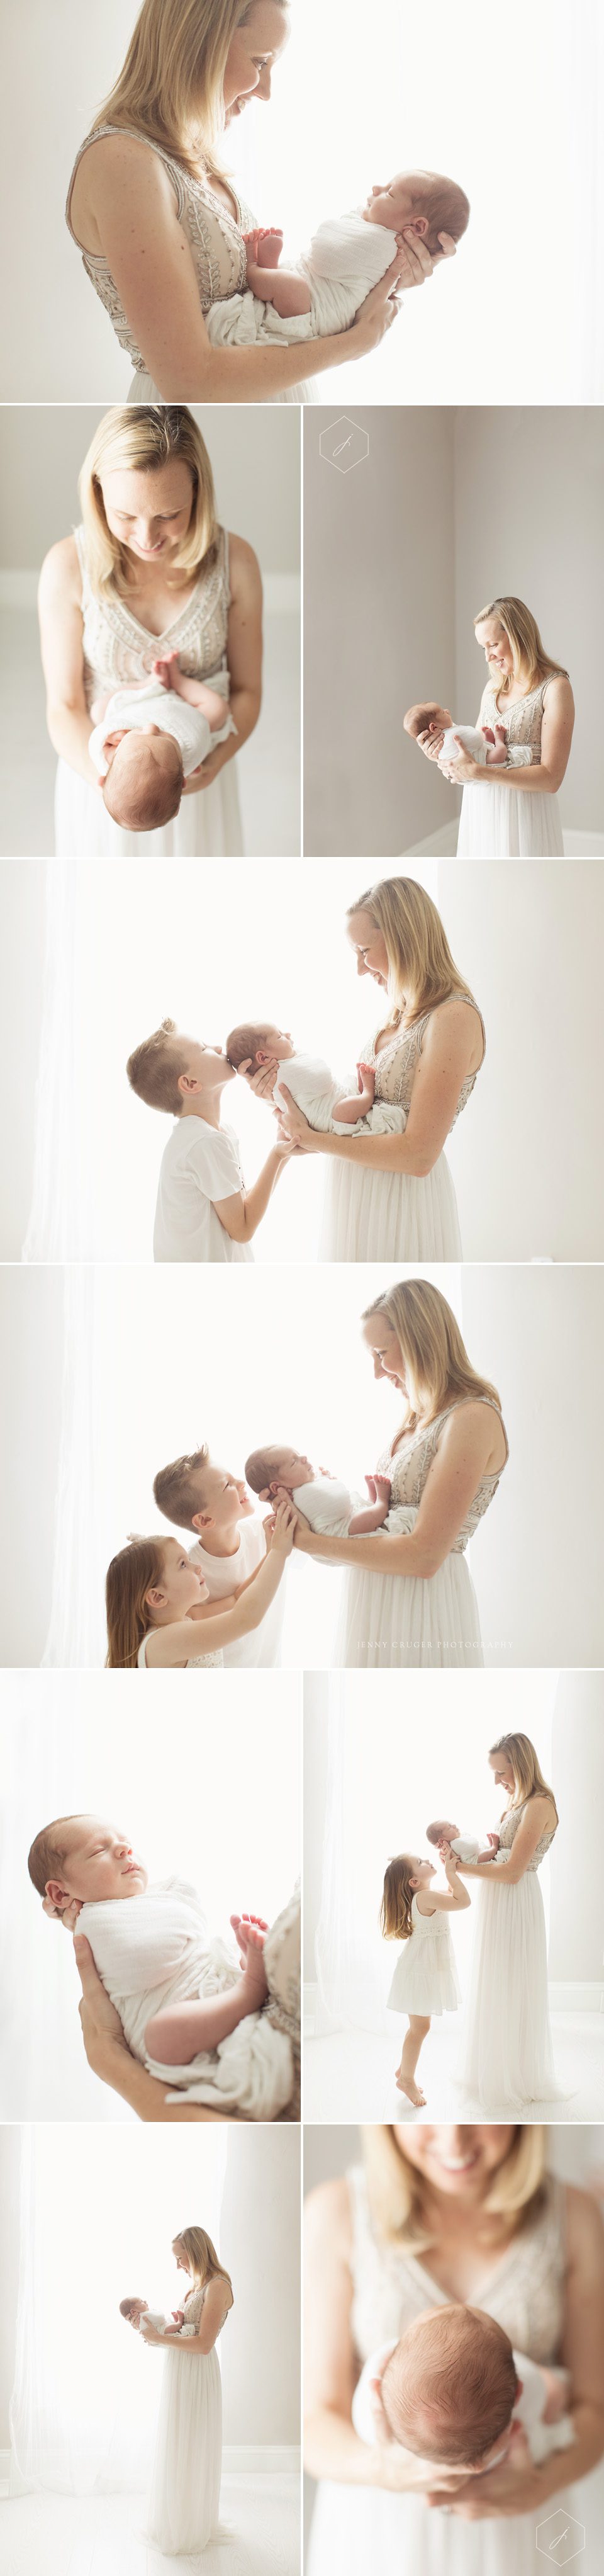 newborn photography nashville | mom with newborn and siblings 